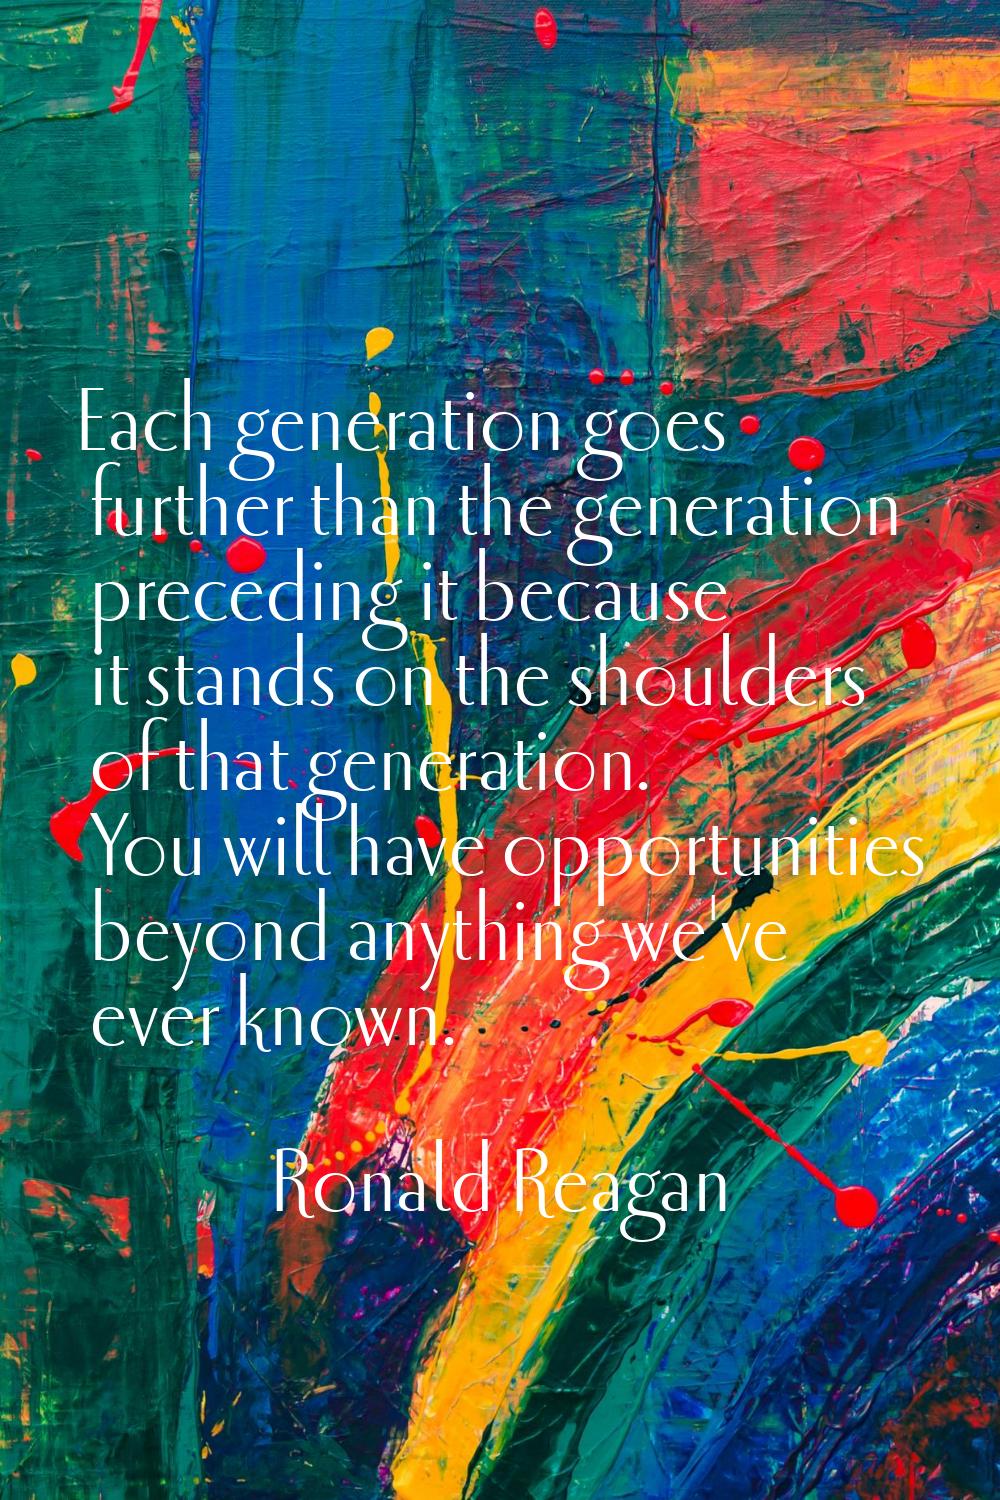 Each generation goes further than the generation preceding it because it stands on the shoulders of